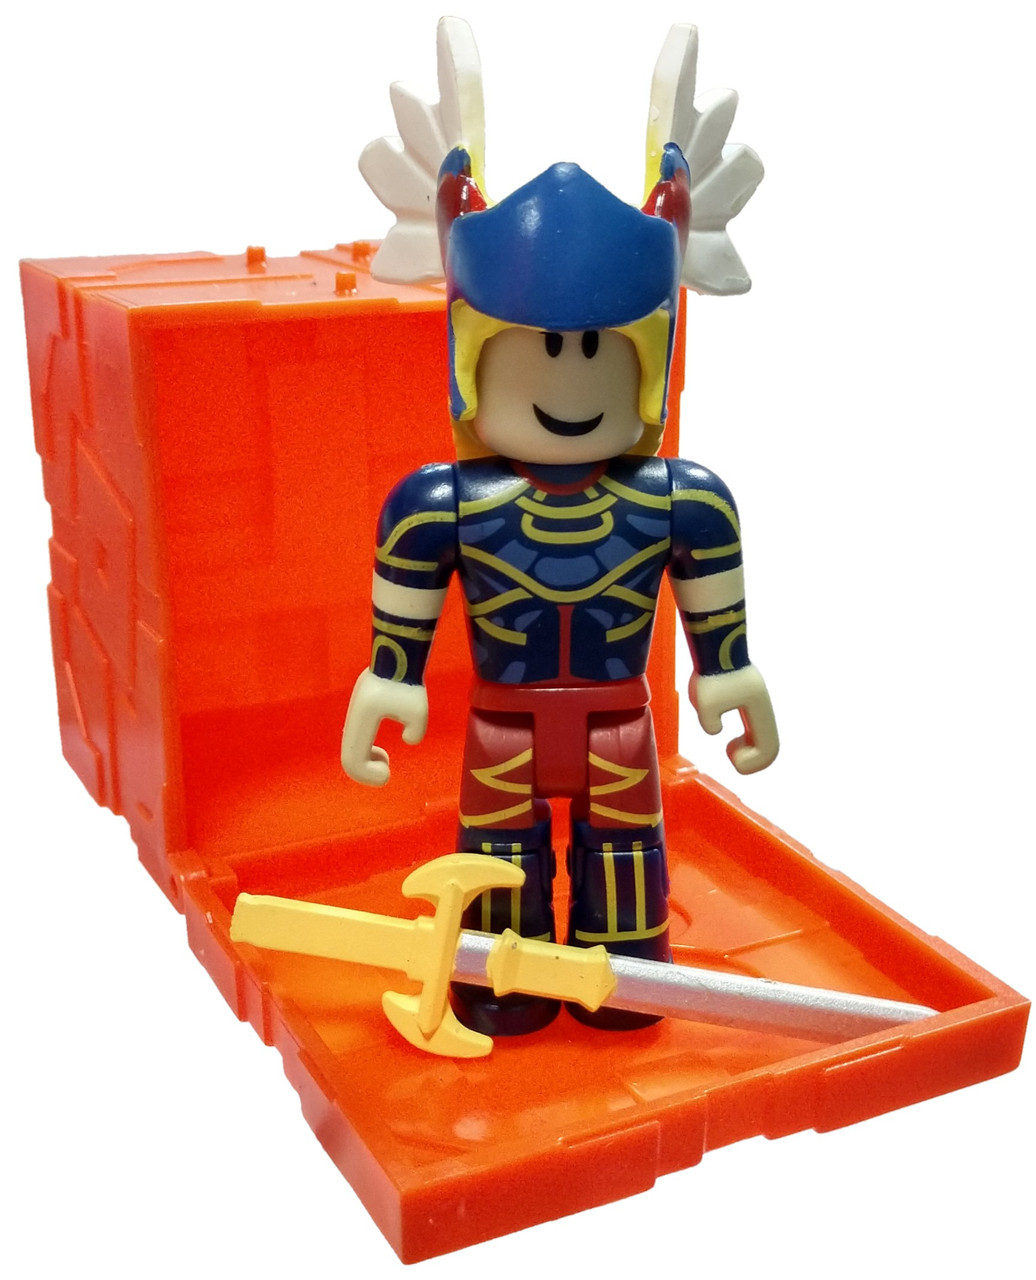 Roblox Series 6 Summoner Tycoon Valkyrie 3 Mini Figure With Orange Cube And Online Code Loose Jazwares Toywiz - red valk roblox code